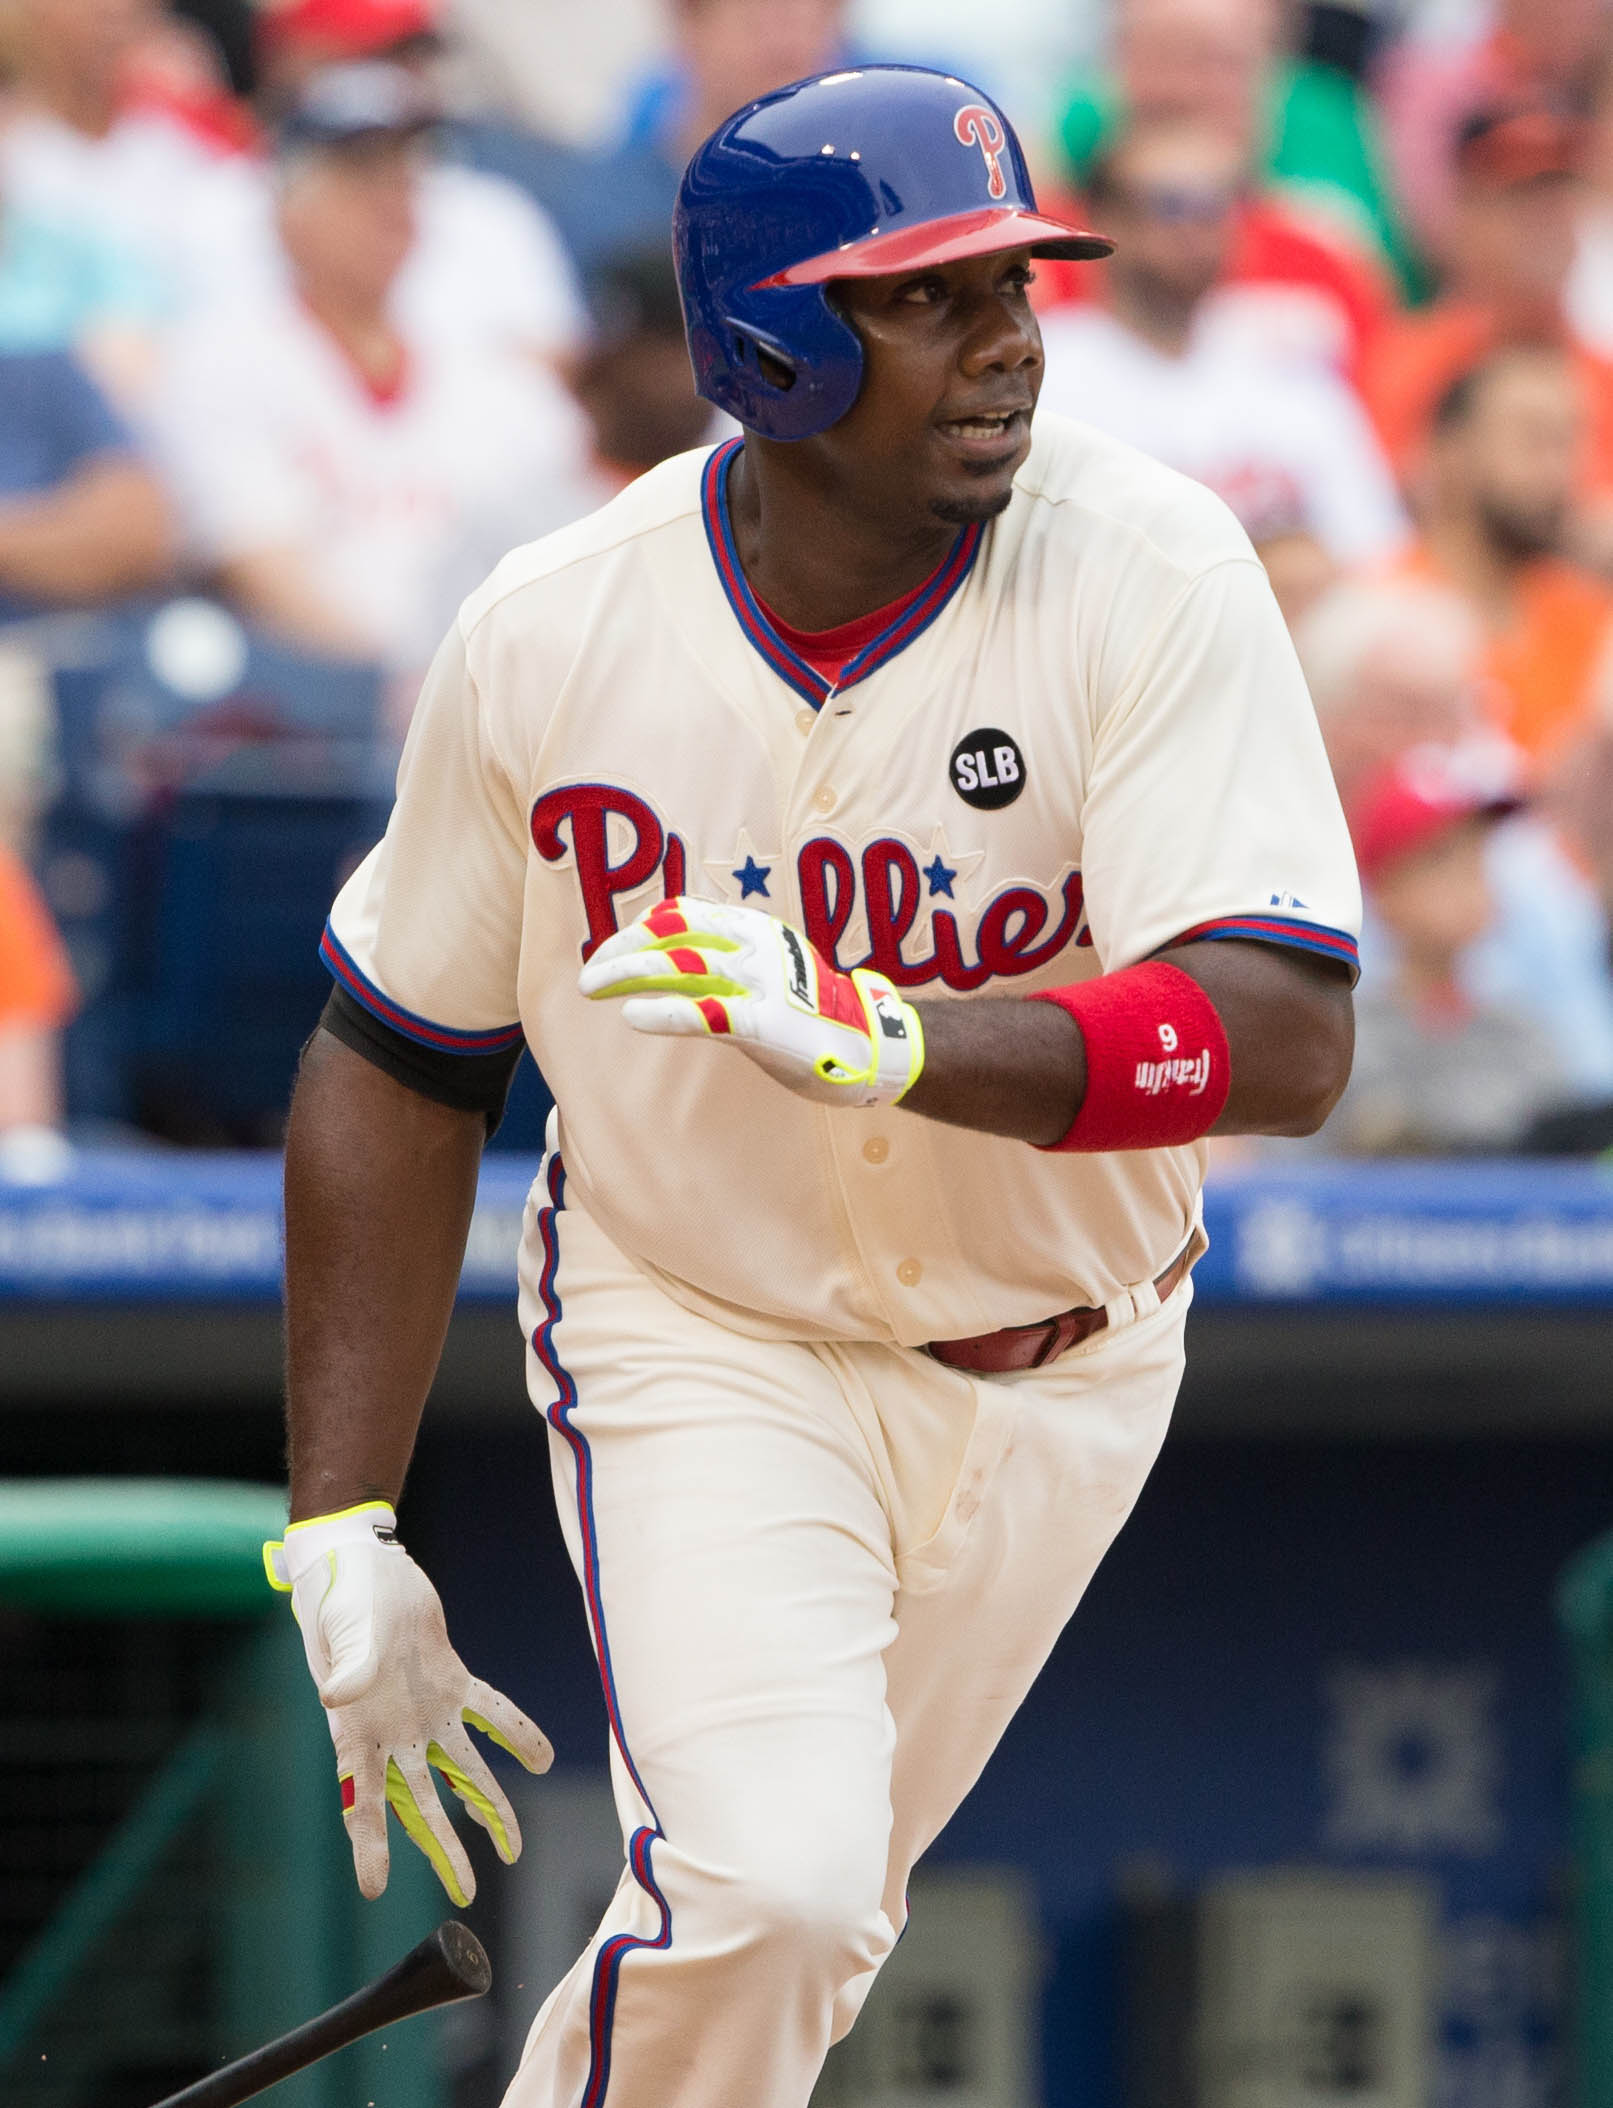 Howard homers, drives in four as Phillies end six-game skid